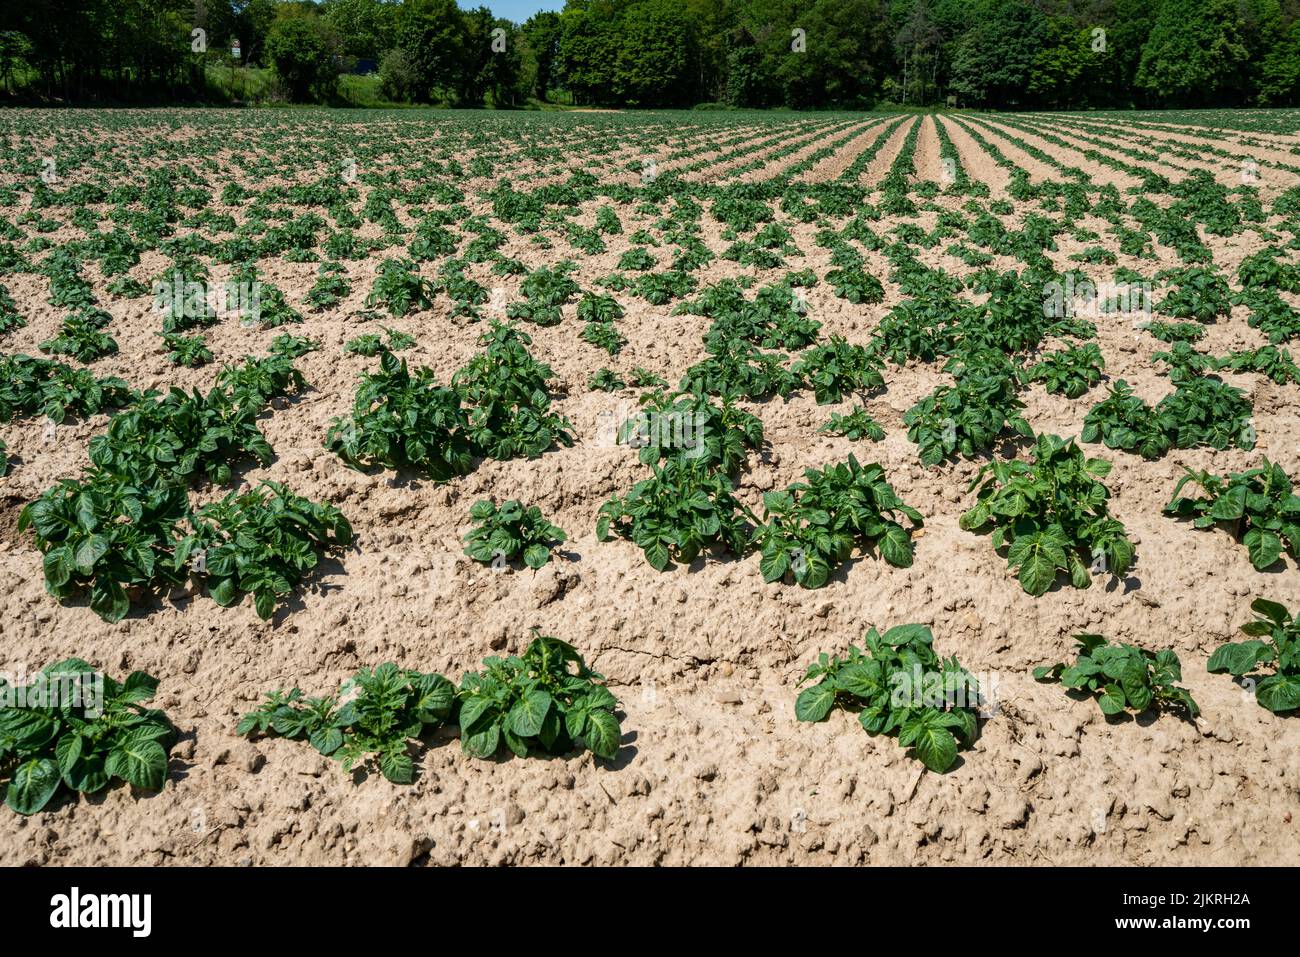 Green field of potato crops in a row Stock Photo